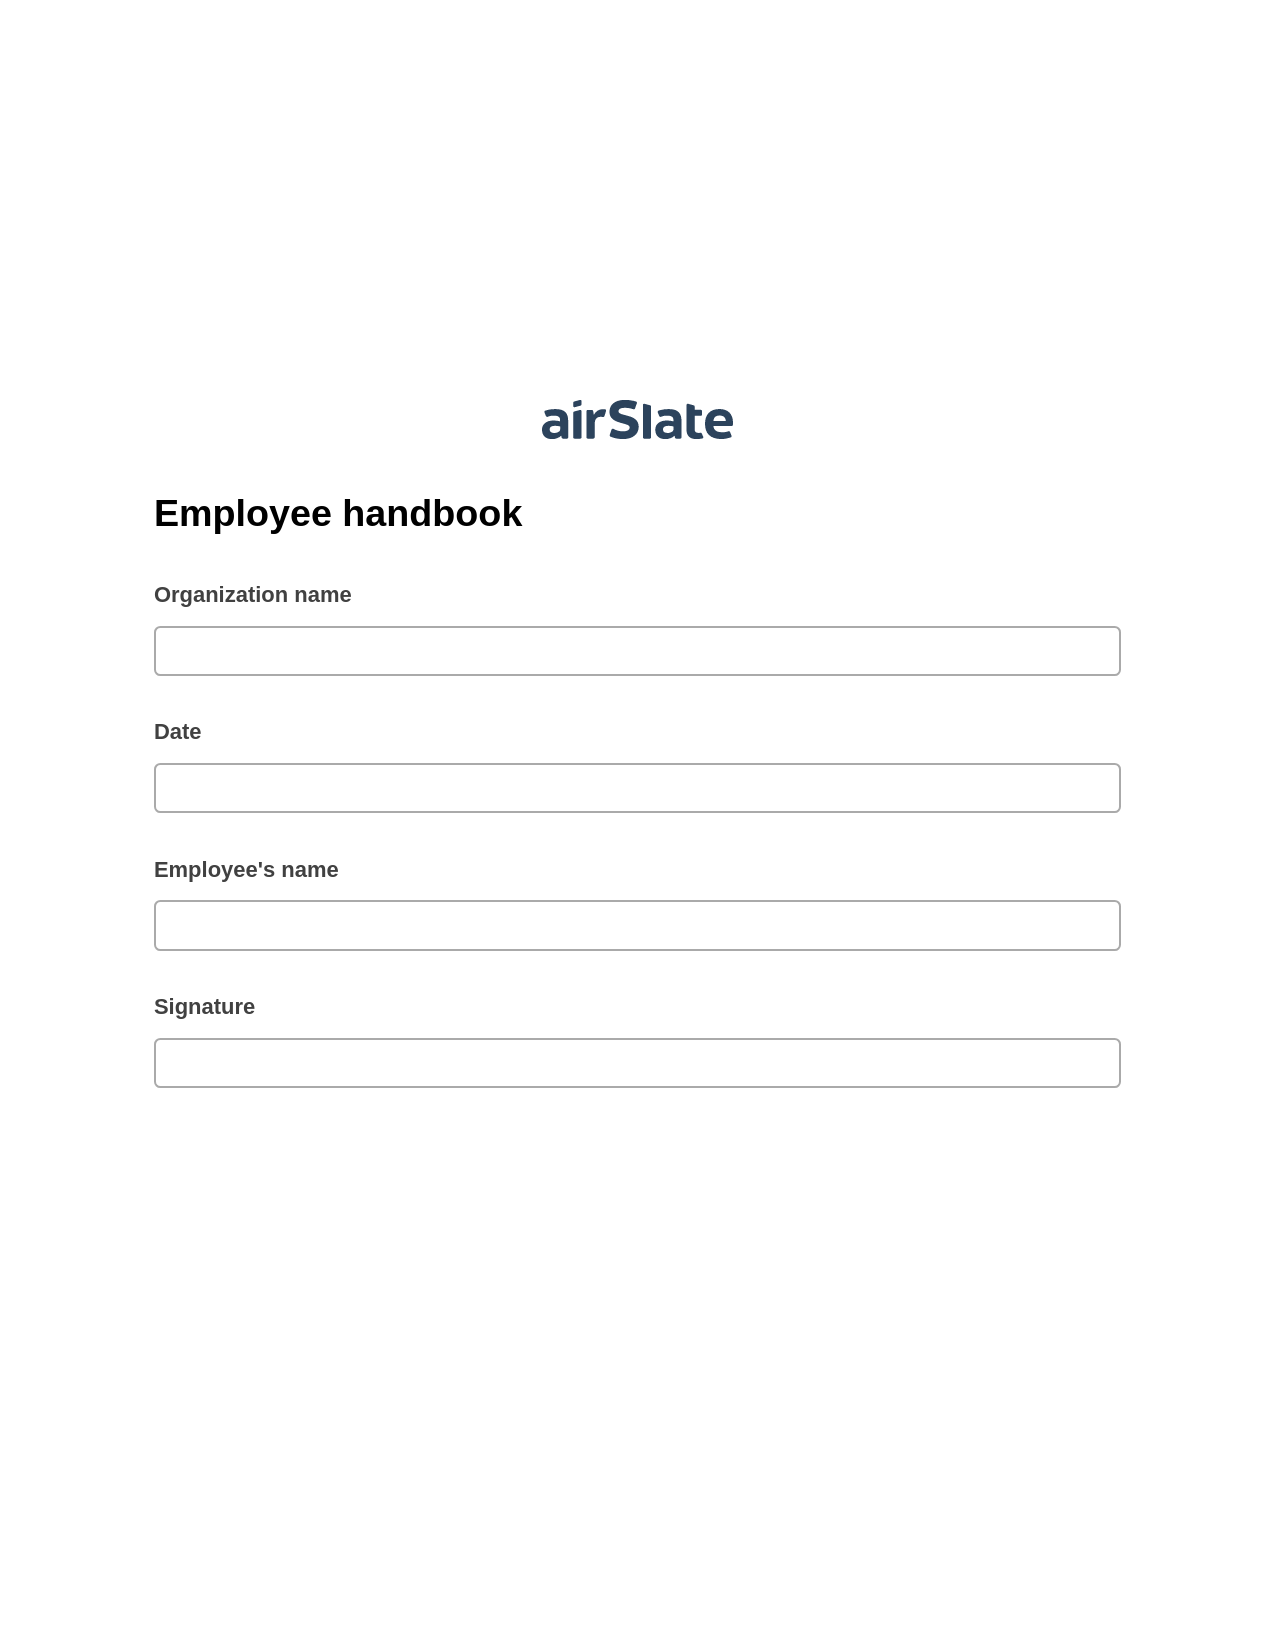 Multirole Employee handbook Pre-fill from Excel Spreadsheet Bot, Add Tags to Slate Bot, Archive to SharePoint Folder Bot